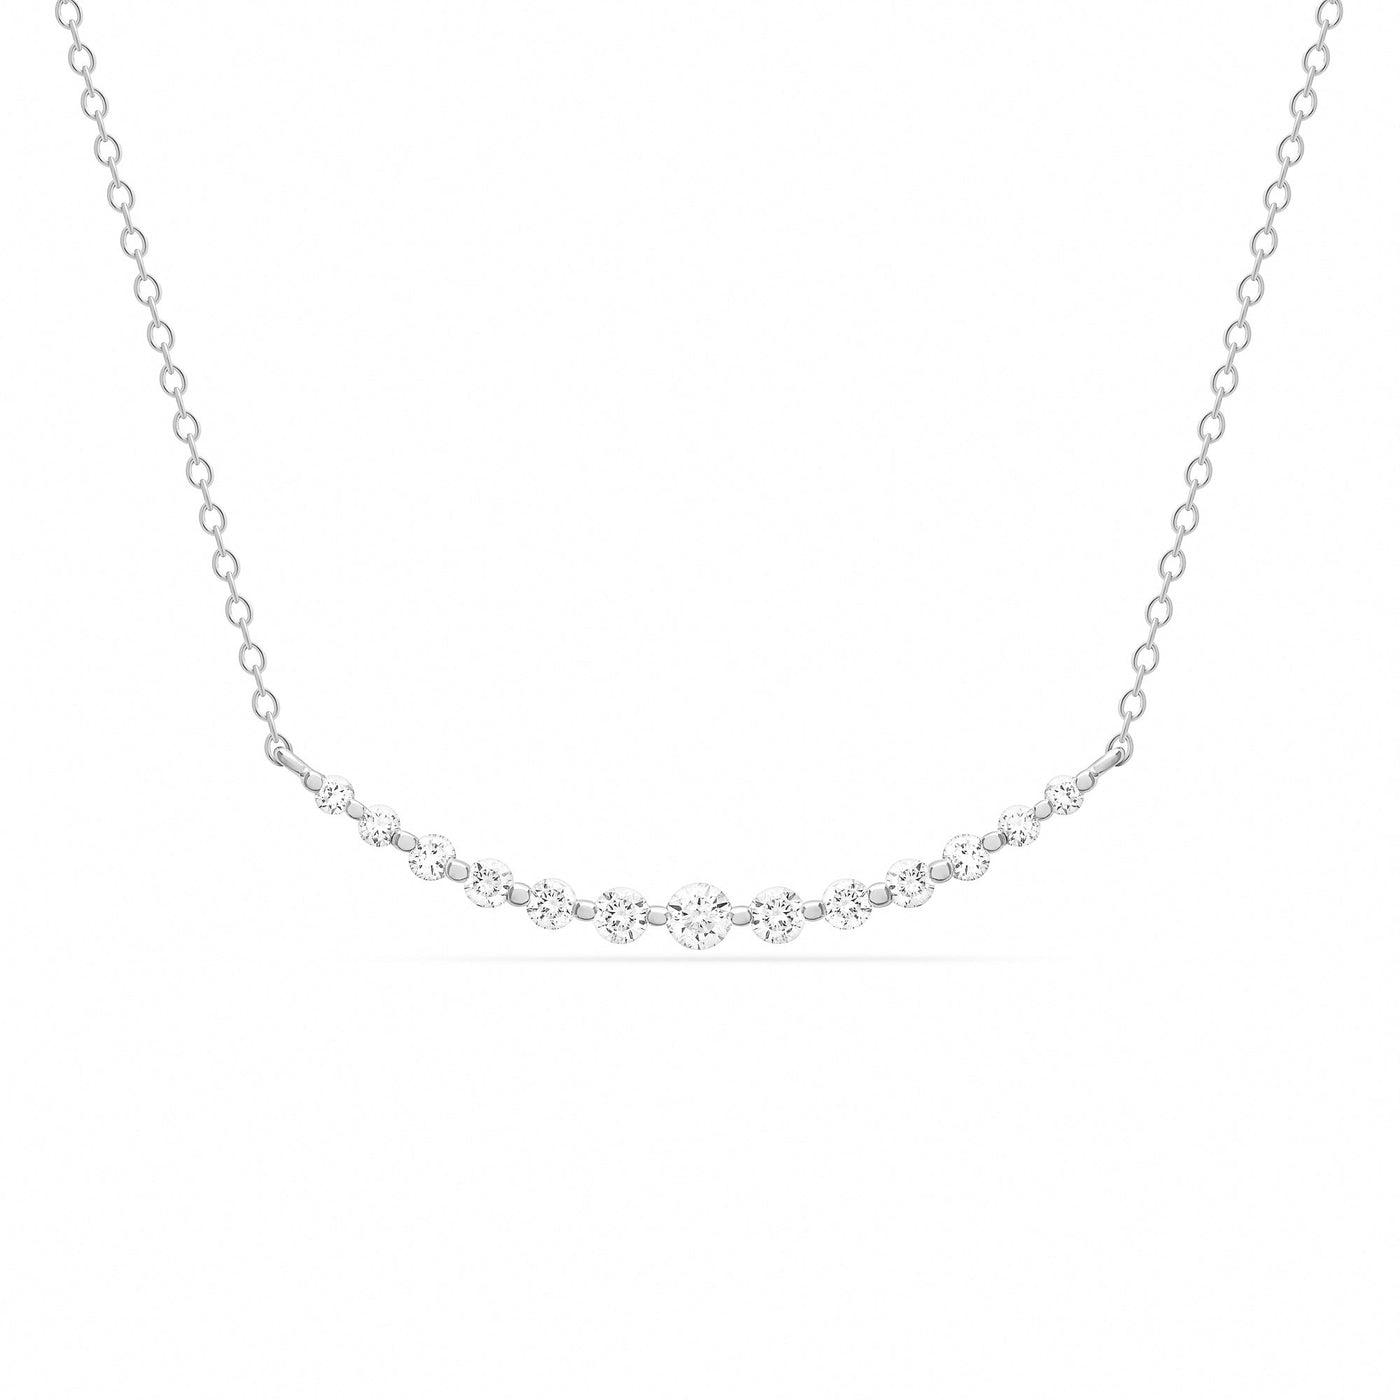 14K Solid Gold Graduated Diamond Bar Necklace White Gold